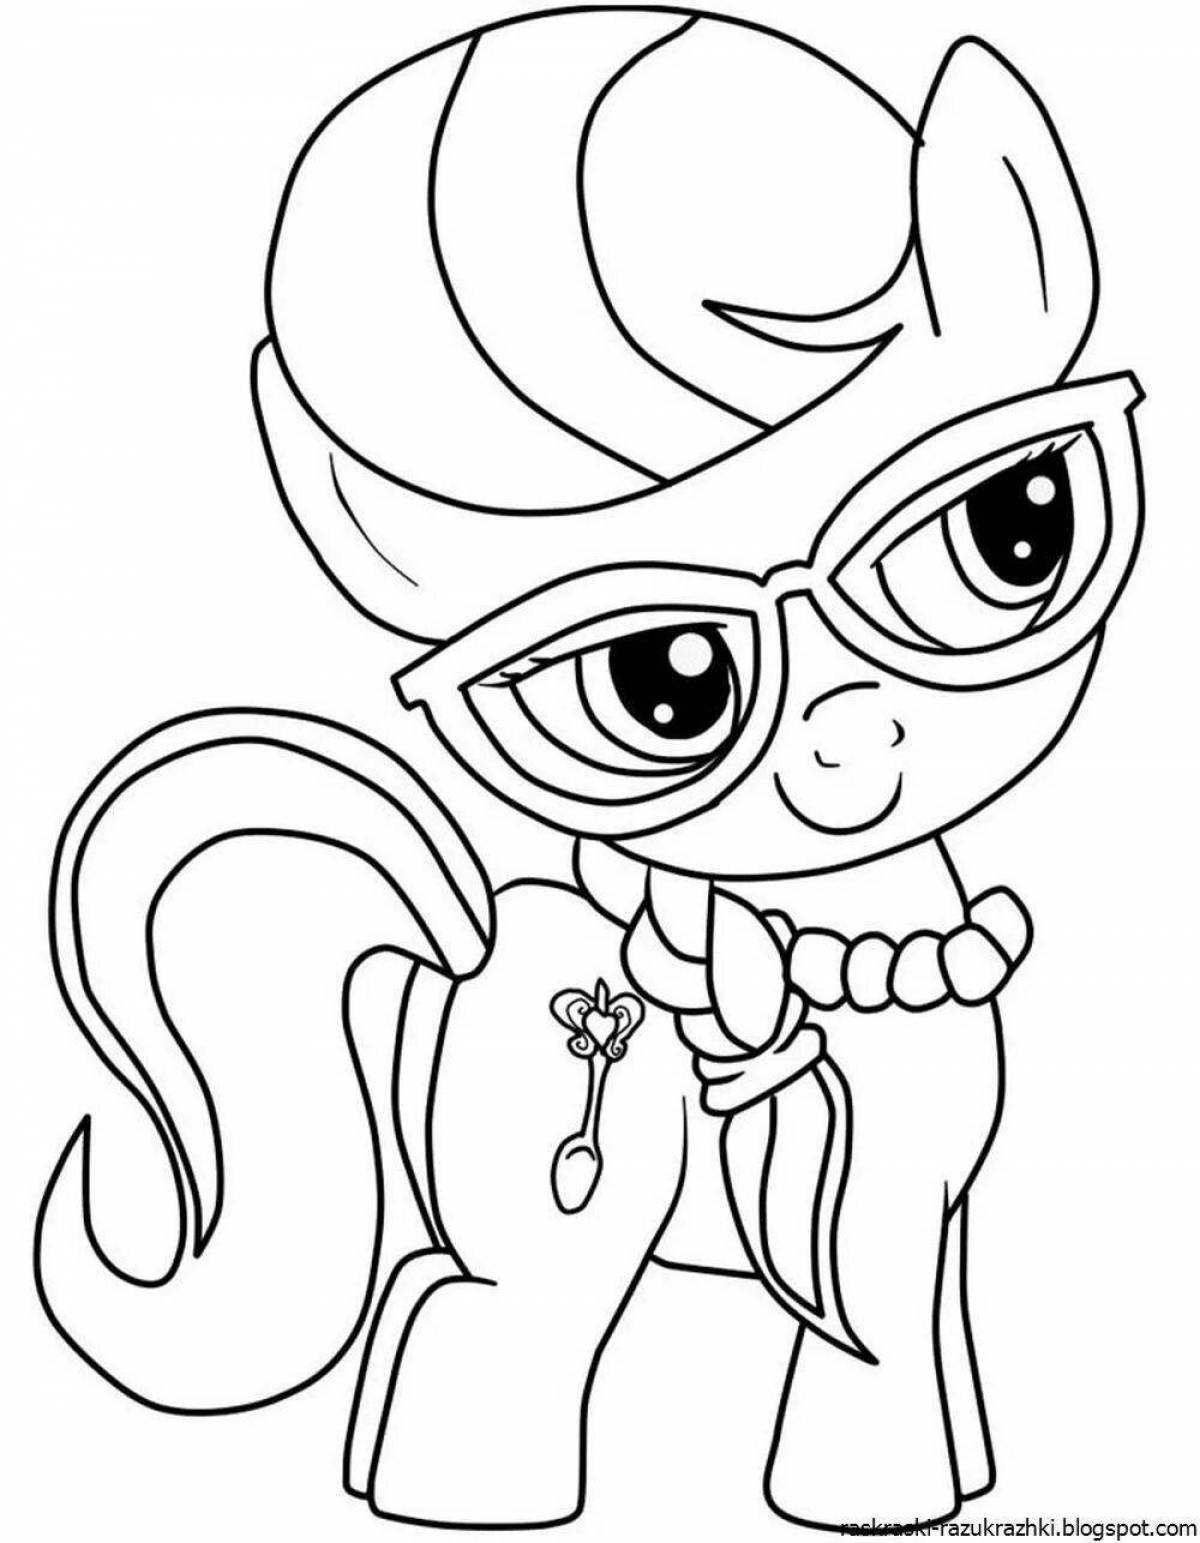 Glittering pony print coloring book